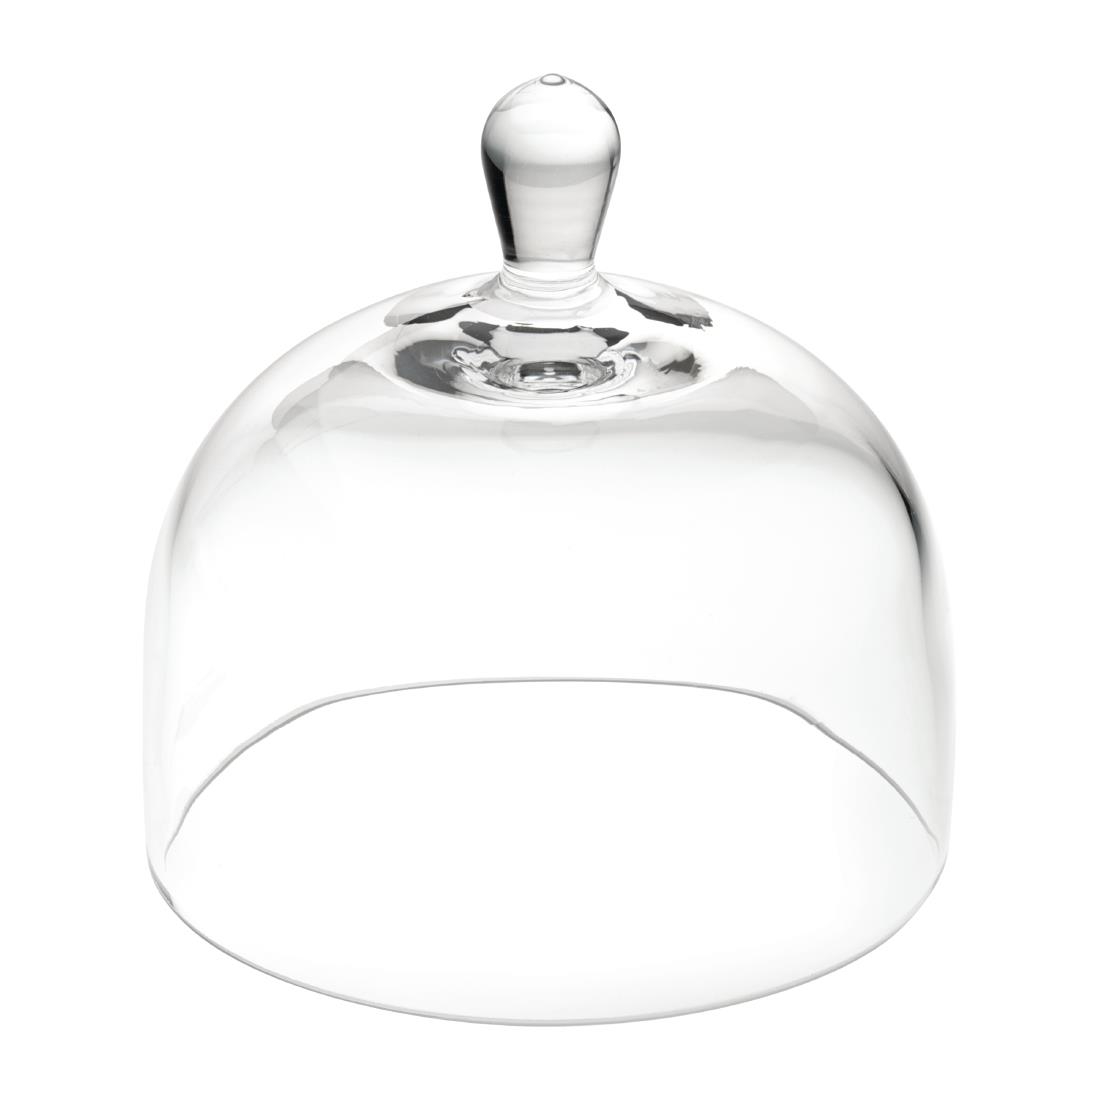 Utopia Small Glass Cloches (Pack of 6)